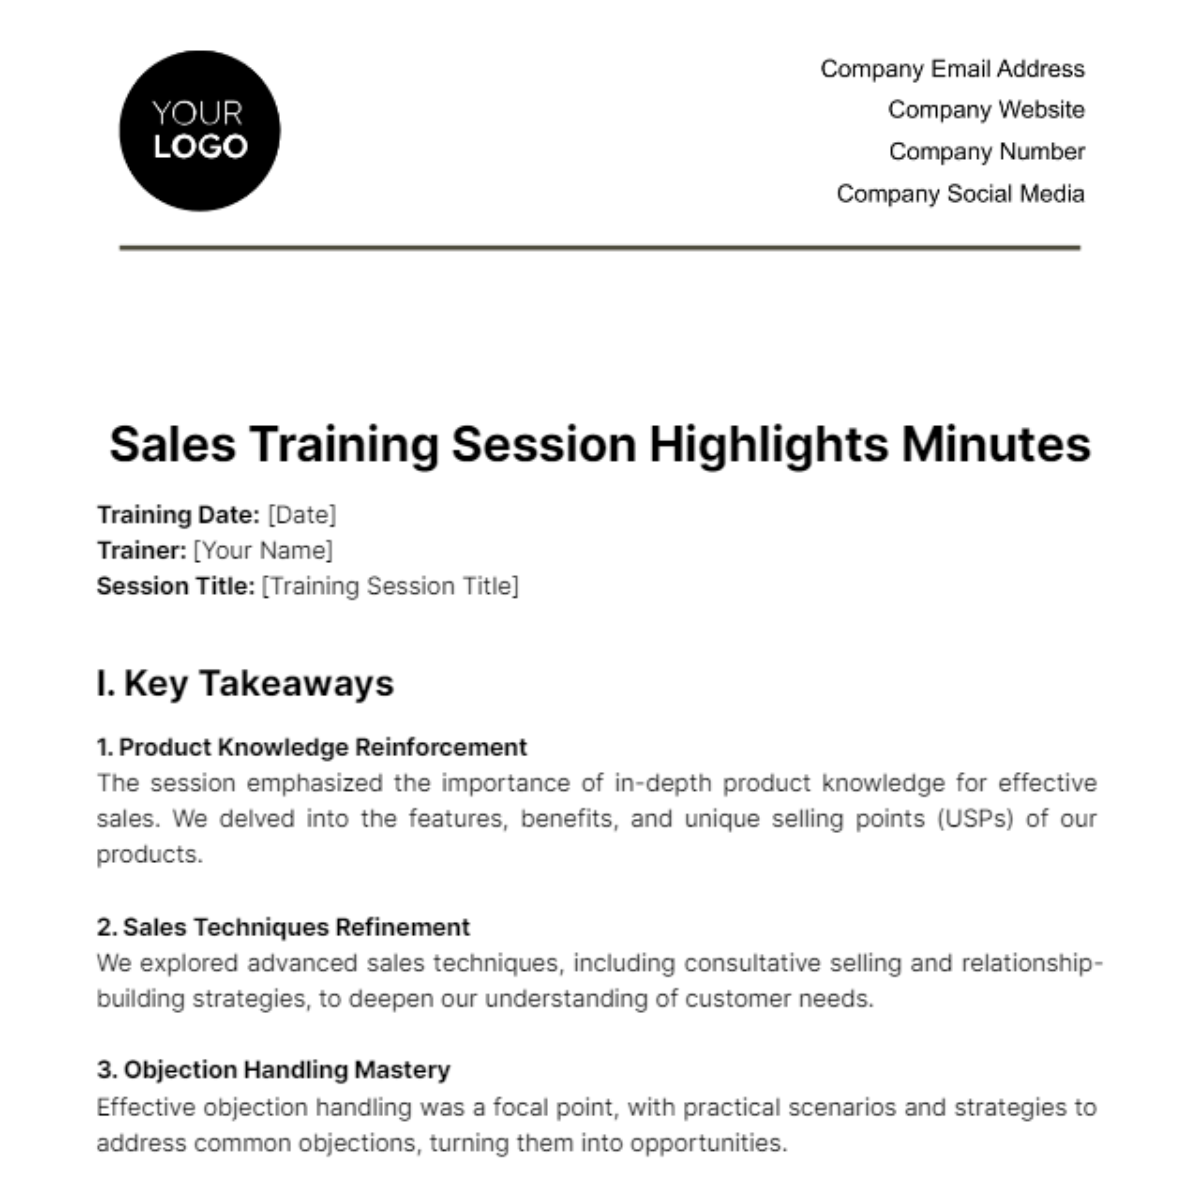 Free Sales Training Session Highlights Minute Template